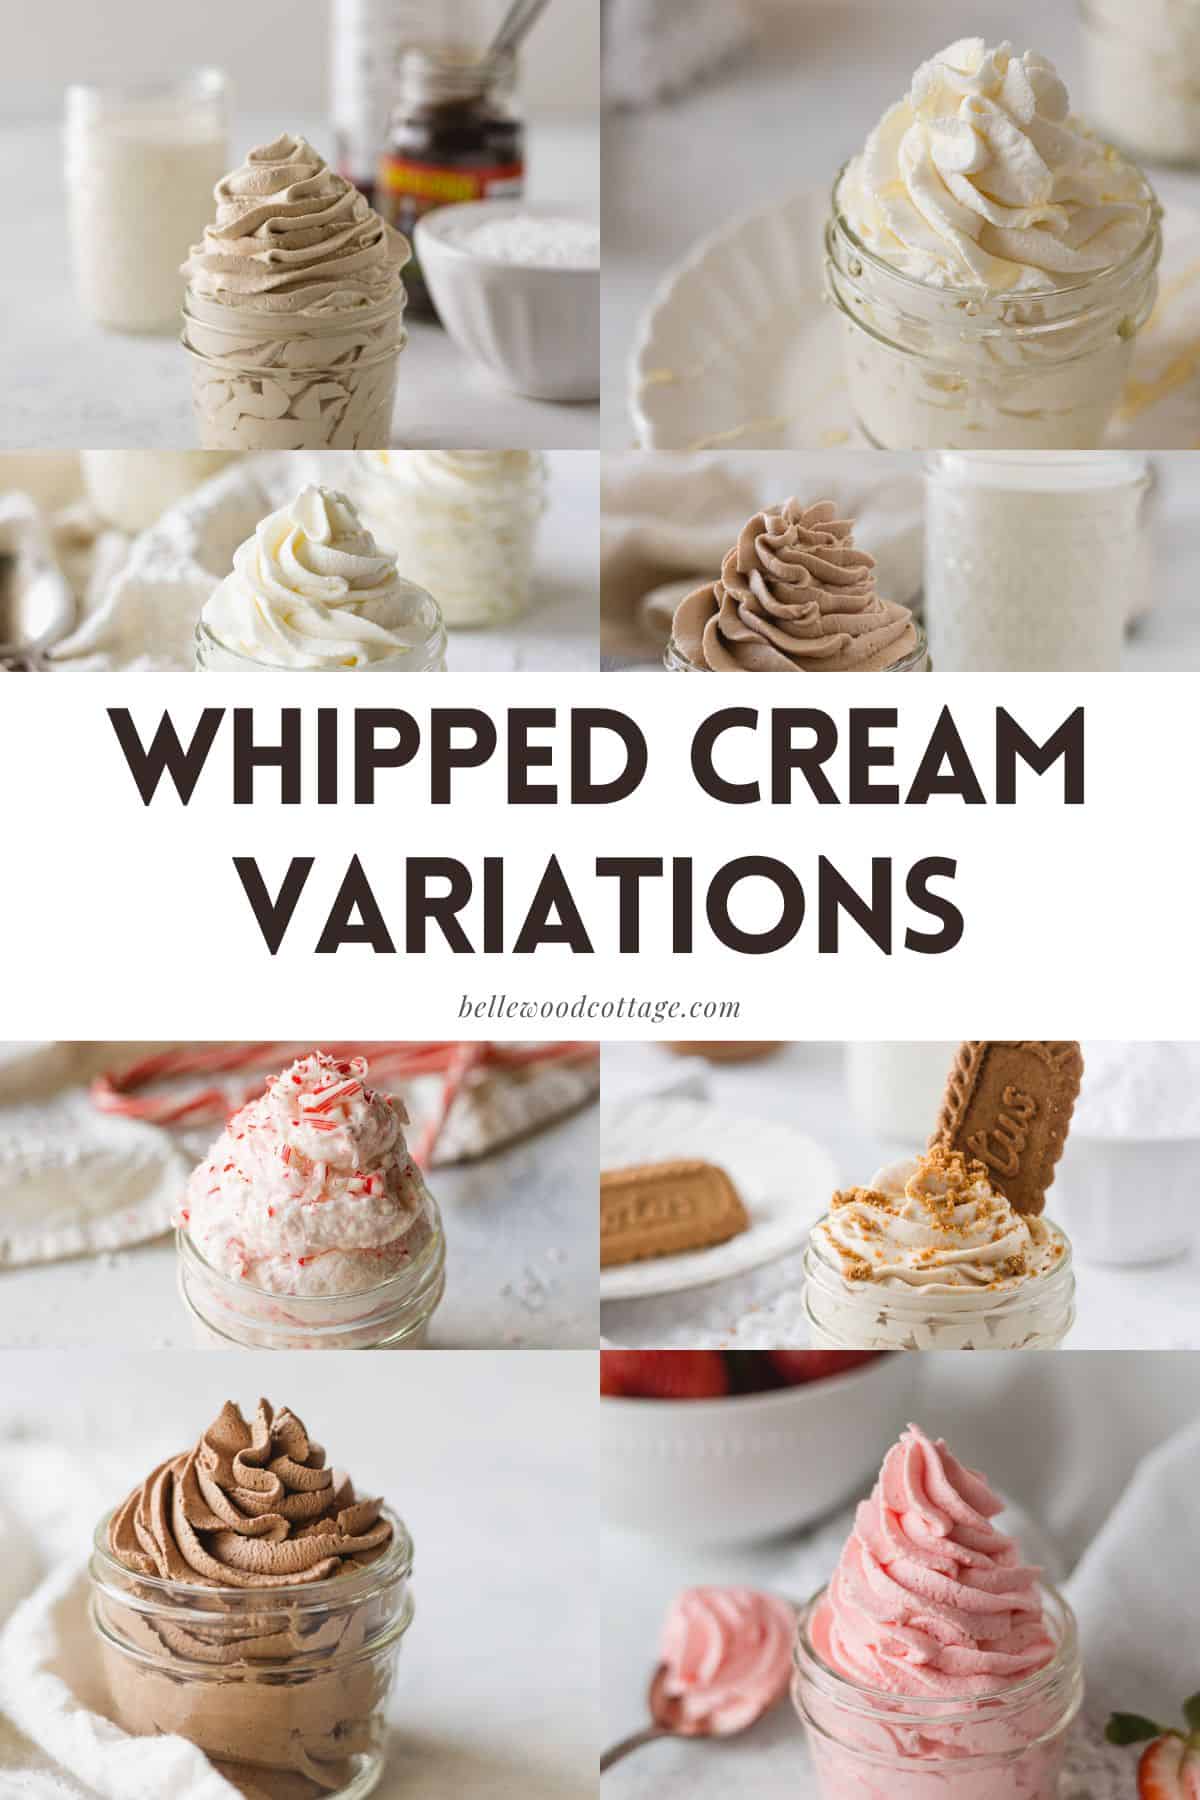 Different flavors of whipped cream piped into small mason jars with the words, "Whipped Cream Variations".